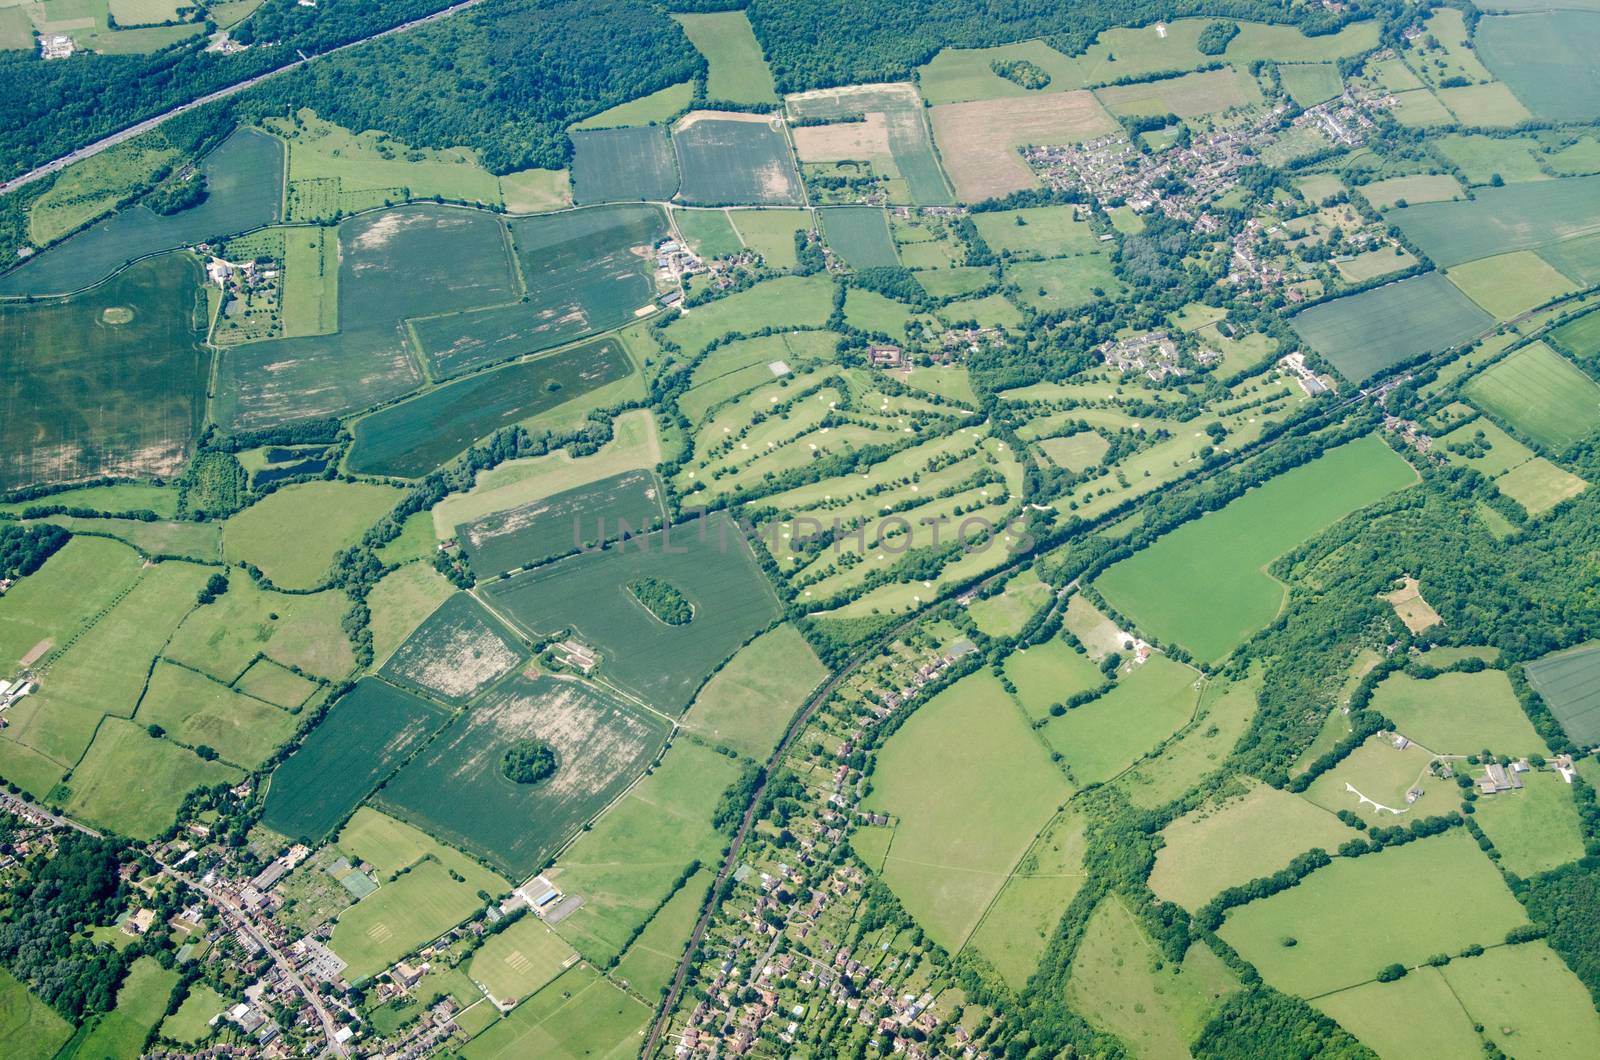 Aerial view of the Kent villages of Otford and Shoreham with the Darenth Valley Country Club and golf course in between.  Viewed on a sunny summer day.  